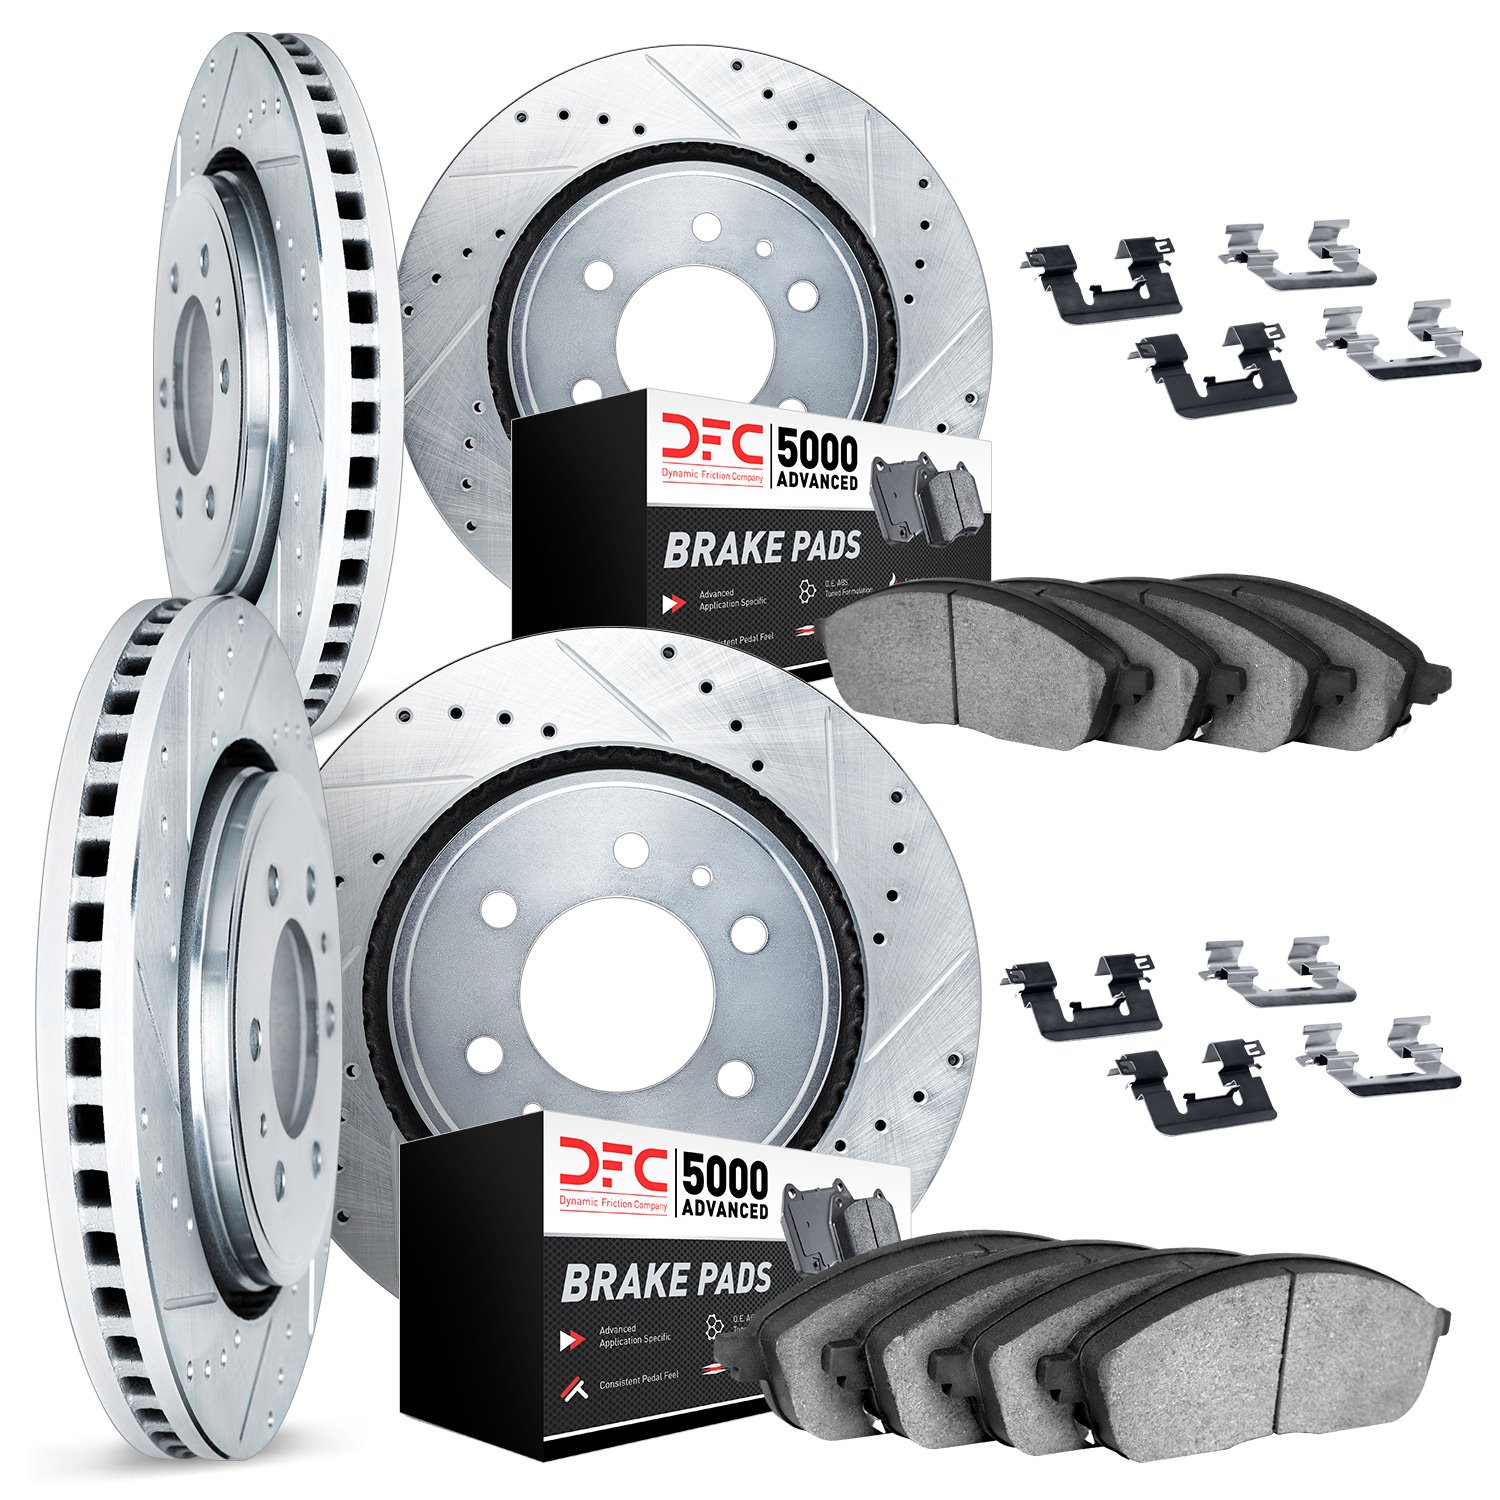 7514-67072 Drilled/Slotted Brake Rotors w/5000 Advanced Brake Pads Kit & Hardware [Silver], Fits Select Infiniti/Nissan, Positio